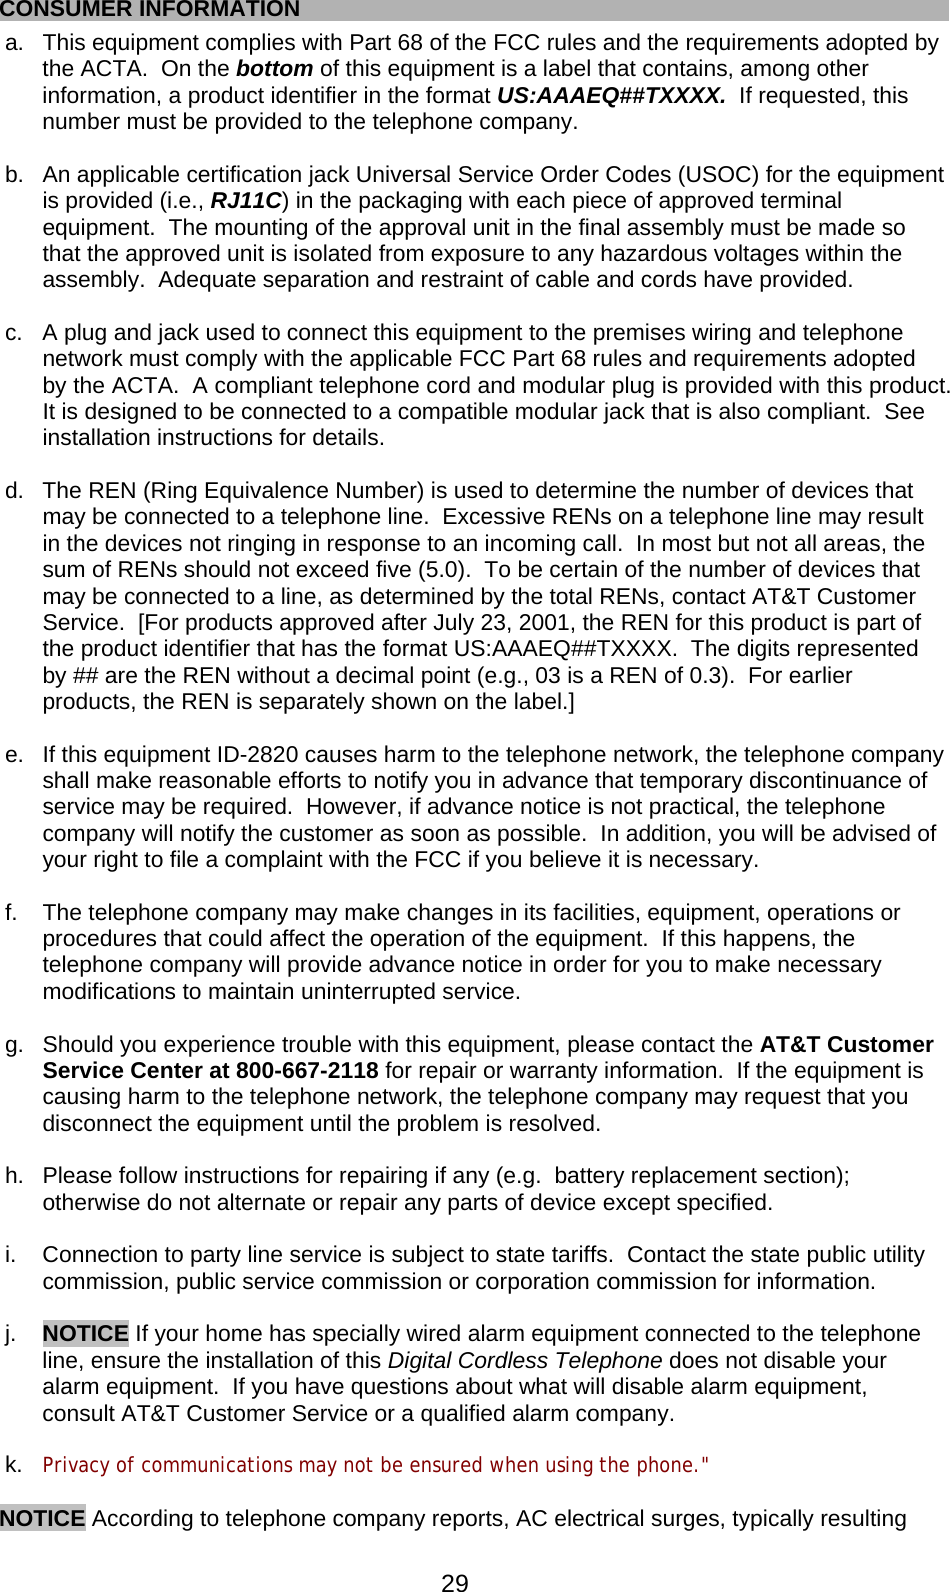  29   CONSUMER INFORMATION a.  This equipment complies with Part 68 of the FCC rules and the requirements adopted by the ACTA.  On the bottom of this equipment is a label that contains, among other information, a product identifier in the format US:AAAEQ##TXXXX.  If requested, this number must be provided to the telephone company.  b.  An applicable certification jack Universal Service Order Codes (USOC) for the equipment is provided (i.e., RJ11C) in the packaging with each piece of approved terminal equipment.  The mounting of the approval unit in the final assembly must be made so that the approved unit is isolated from exposure to any hazardous voltages within the assembly.  Adequate separation and restraint of cable and cords have provided.  c.  A plug and jack used to connect this equipment to the premises wiring and telephone network must comply with the applicable FCC Part 68 rules and requirements adopted by the ACTA.  A compliant telephone cord and modular plug is provided with this product.  It is designed to be connected to a compatible modular jack that is also compliant.  See installation instructions for details.  d.  The REN (Ring Equivalence Number) is used to determine the number of devices that may be connected to a telephone line.  Excessive RENs on a telephone line may result in the devices not ringing in response to an incoming call.  In most but not all areas, the sum of RENs should not exceed five (5.0).  To be certain of the number of devices that may be connected to a line, as determined by the total RENs, contact AT&amp;T Customer Service.  [For products approved after July 23, 2001, the REN for this product is part of the product identifier that has the format US:AAAEQ##TXXXX.  The digits represented by ## are the REN without a decimal point (e.g., 03 is a REN of 0.3).  For earlier products, the REN is separately shown on the label.]  e.  If this equipment ID-2820 causes harm to the telephone network, the telephone company shall make reasonable efforts to notify you in advance that temporary discontinuance of service may be required.  However, if advance notice is not practical, the telephone company will notify the customer as soon as possible.  In addition, you will be advised of your right to file a complaint with the FCC if you believe it is necessary.  f.  The telephone company may make changes in its facilities, equipment, operations or procedures that could affect the operation of the equipment.  If this happens, the telephone company will provide advance notice in order for you to make necessary modifications to maintain uninterrupted service.  g.  Should you experience trouble with this equipment, please contact the AT&amp;T Customer Service Center at 800-667-2118 for repair or warranty information.  If the equipment is causing harm to the telephone network, the telephone company may request that you disconnect the equipment until the problem is resolved.  h.  Please follow instructions for repairing if any (e.g.  battery replacement section); otherwise do not alternate or repair any parts of device except specified.  i.  Connection to party line service is subject to state tariffs.  Contact the state public utility commission, public service commission or corporation commission for information.  j.  NOTICE If your home has specially wired alarm equipment connected to the telephone line, ensure the installation of this Digital Cordless Telephone does not disable your alarm equipment.  If you have questions about what will disable alarm equipment, consult AT&amp;T Customer Service or a qualified alarm company.  k.  Privacy of communications may not be ensured when using the phone.&quot;  NOTICE According to telephone company reports, AC electrical surges, typically resulting 